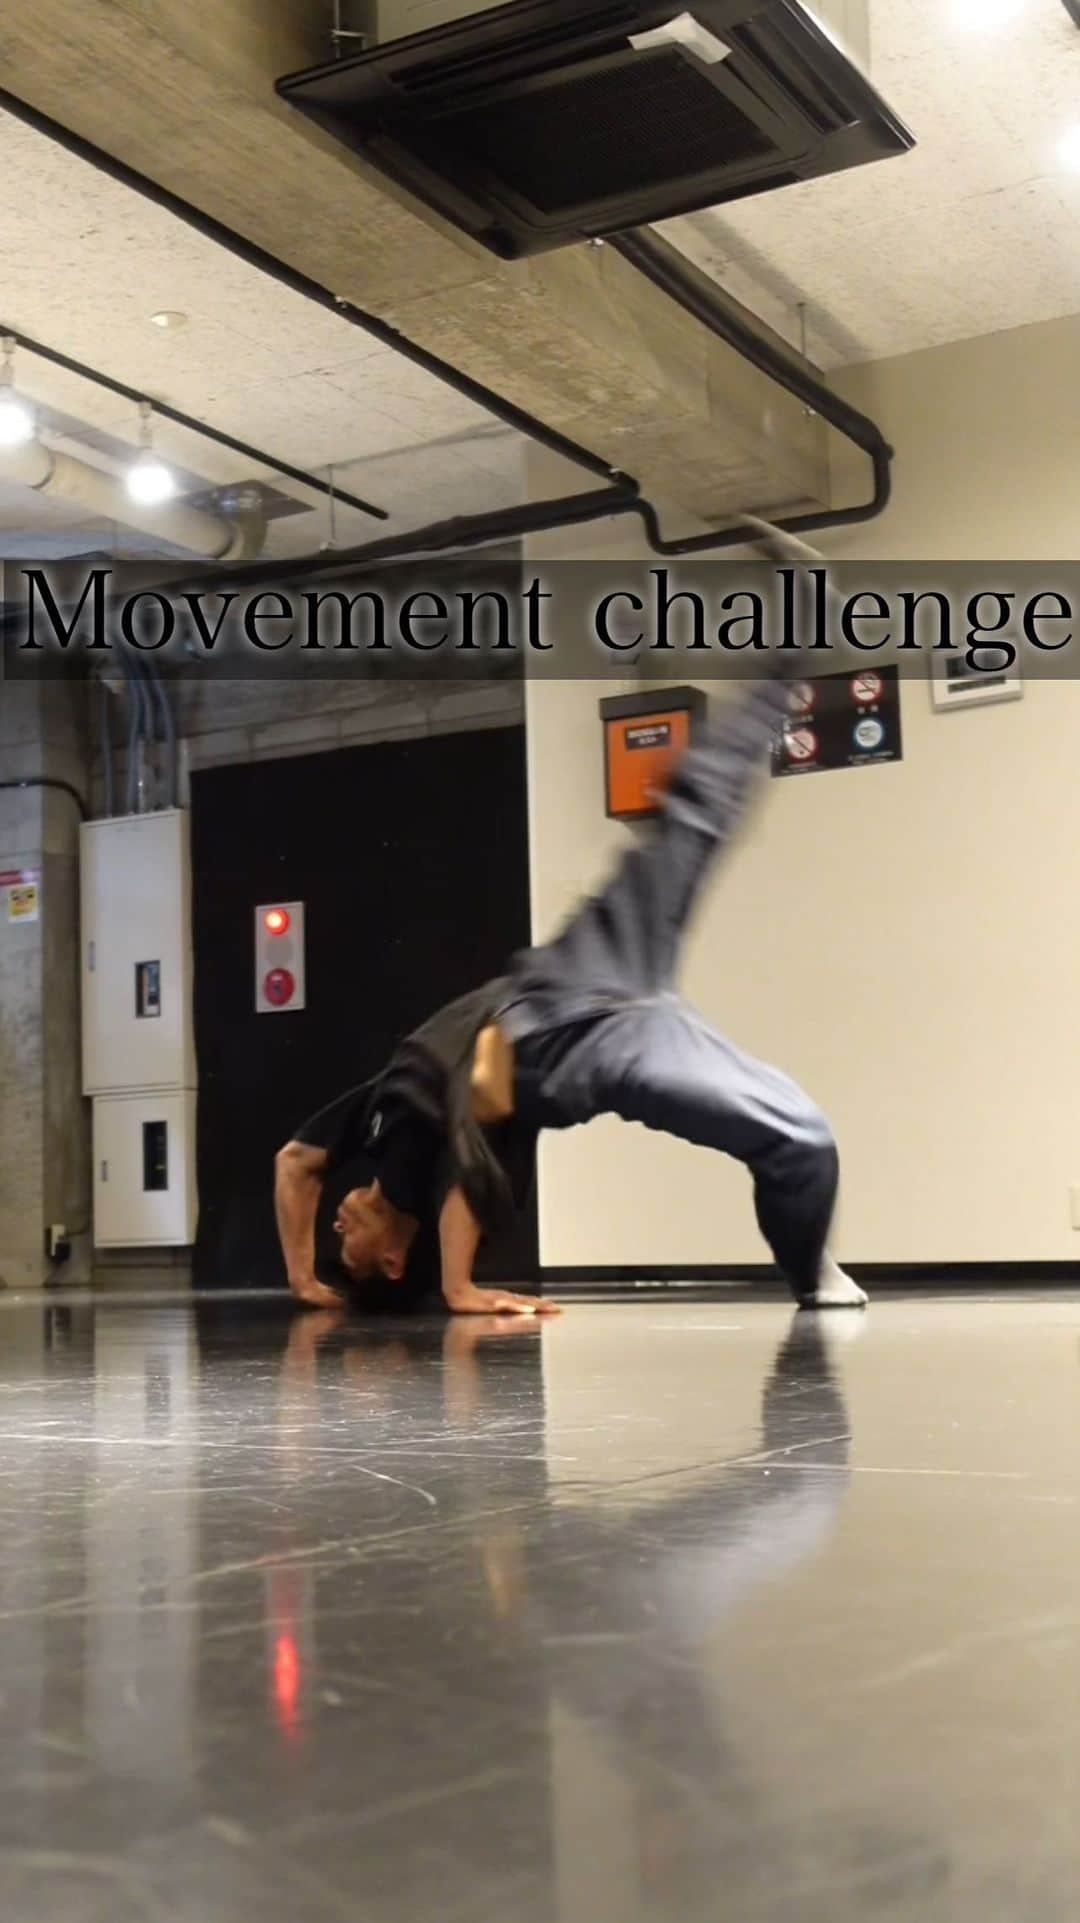 asukaのインスタグラム：「Easy movement challenge 🖤  Everybody can do this skill 🔥   What do you think?🤔   Lectured by @bboy_asuka   If you can master it, let me know in the comments😉   ↓↓↓↓   #dance #breaking #breakdance #bboy #powermove #powermoves #acrobatics #tricking #parkour #gymnastics #movement #capoeira #ブレイキン #超人」